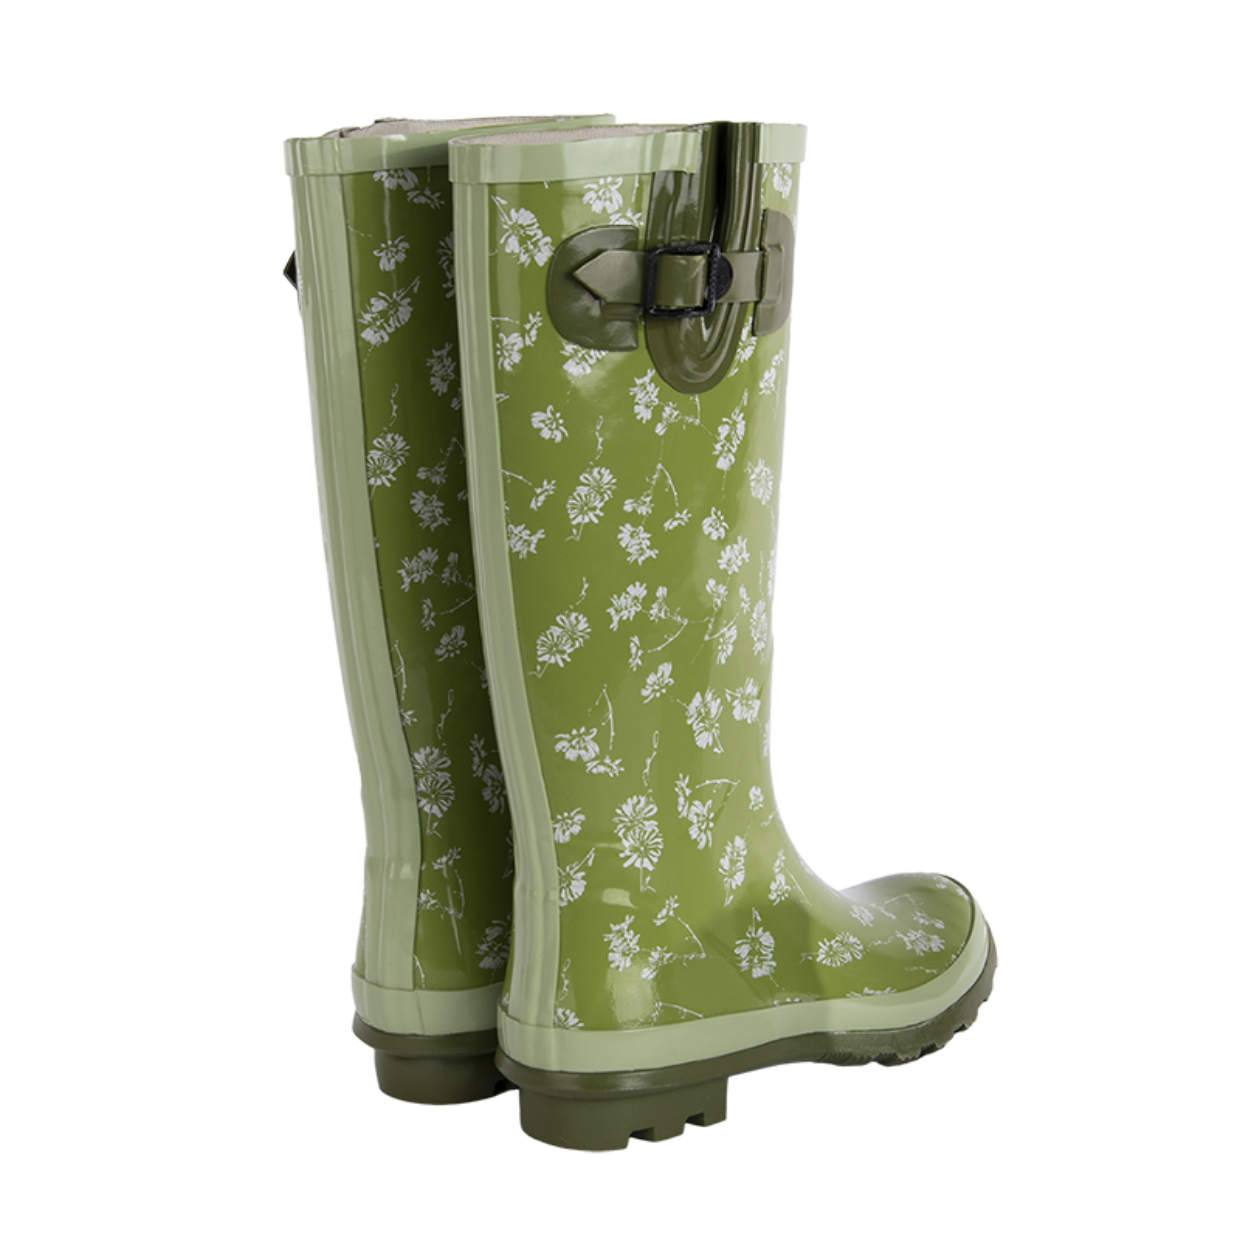 Wellies PNG Images Transparent Background | PNG Play